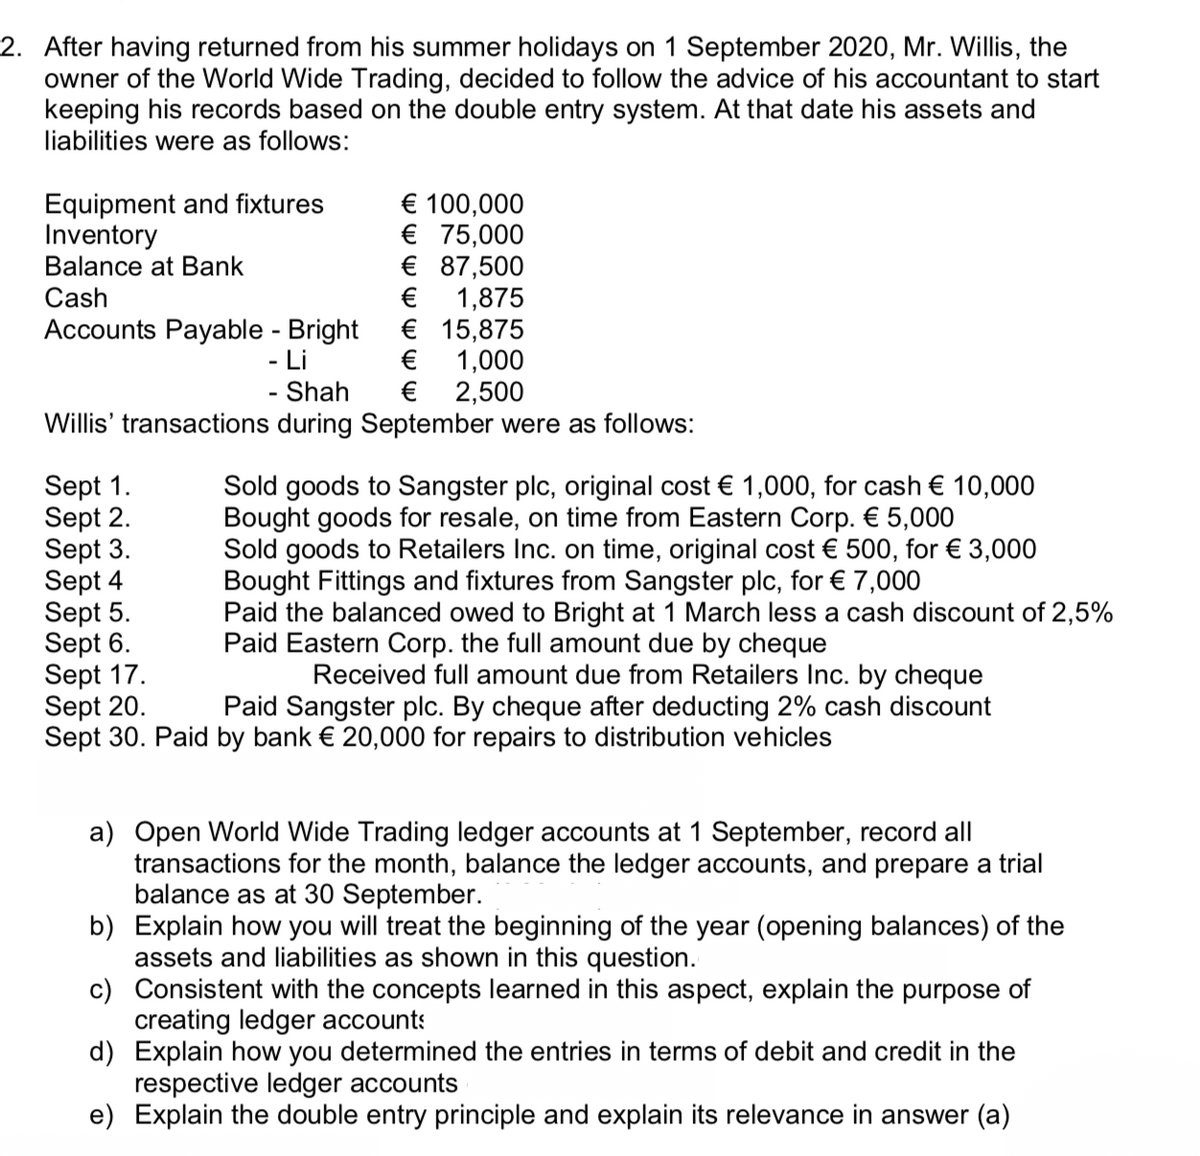 2. After having returned from his summer holidays on 1 September 2020, Mr. Willis, the
owner of the World Wide Trading, decided to follow the advice of his accountant to start
keeping his records based on the double entry system. At that date his assets and
liabilities were as follows:
Equipment and fixtures
Inventory
Balance at Bank
€ 100,000
€ 75,000
€ 87,500
€
Cash
Accounts Payable - Bright
- Li
1,875
€ 15,875
€
1,000
€ 2,500
Shah
Willis' transactions during September were as follows:
Sept 1.
Sept 2.
Sept 3.
Sept 4
Sept 5.
Sept 6.
Sept 17.
Sept 20.
Sept 30. Paid by bank € 20,000 for repairs to distribution vehicles
Sold goods to Sangster plc, original cost € 1,000, for cash € 10,000
Bought goods for resale, on time from Eastern Corp. € 5,000
Sold goods to Retailers Inc. on time, original cost € 500, for € 3,000
Bought Fittings and fixtures from Sangster plc, for € 7,000
Paid the balanced owed to Bright at 1 March less a cash discount of 2,5%
Paid Eastern Corp. the full amount due by cheque
Received full amount due from Retailers Inc. by cheque
Paid Sangster plc. By cheque after deducting 2% cash discount
a) Open World Wide Trading ledger accounts at 1 September, record all
transactions for the month, balance the ledger accounts, and prepare a trial
balance as at 30 September.
b) Explain how you will treat the beginning of the year (opening balances) of the
assets and liabilities as shown in this question.
c) Consistent with the concepts learned in this aspect, explain the purpose of
creating ledger accounts
d) Explain how you determined the entries in terms of debit and credit in the
respective ledger accounts
e) Explain the double entry principle and explain its relevance in answer (a)
